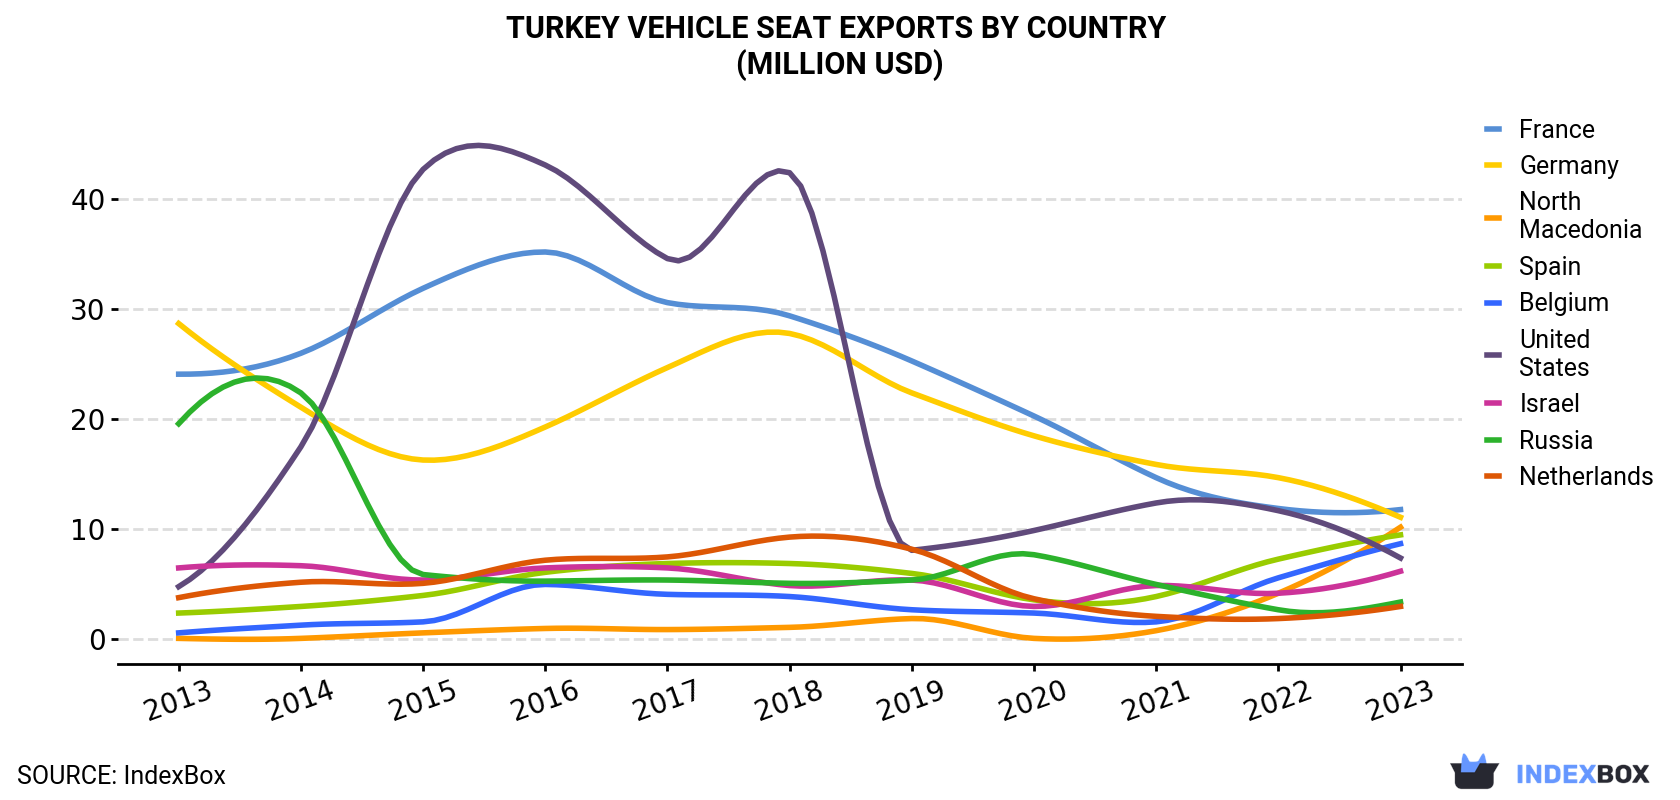 Turkey Vehicle Seat Exports By Country (Million USD)